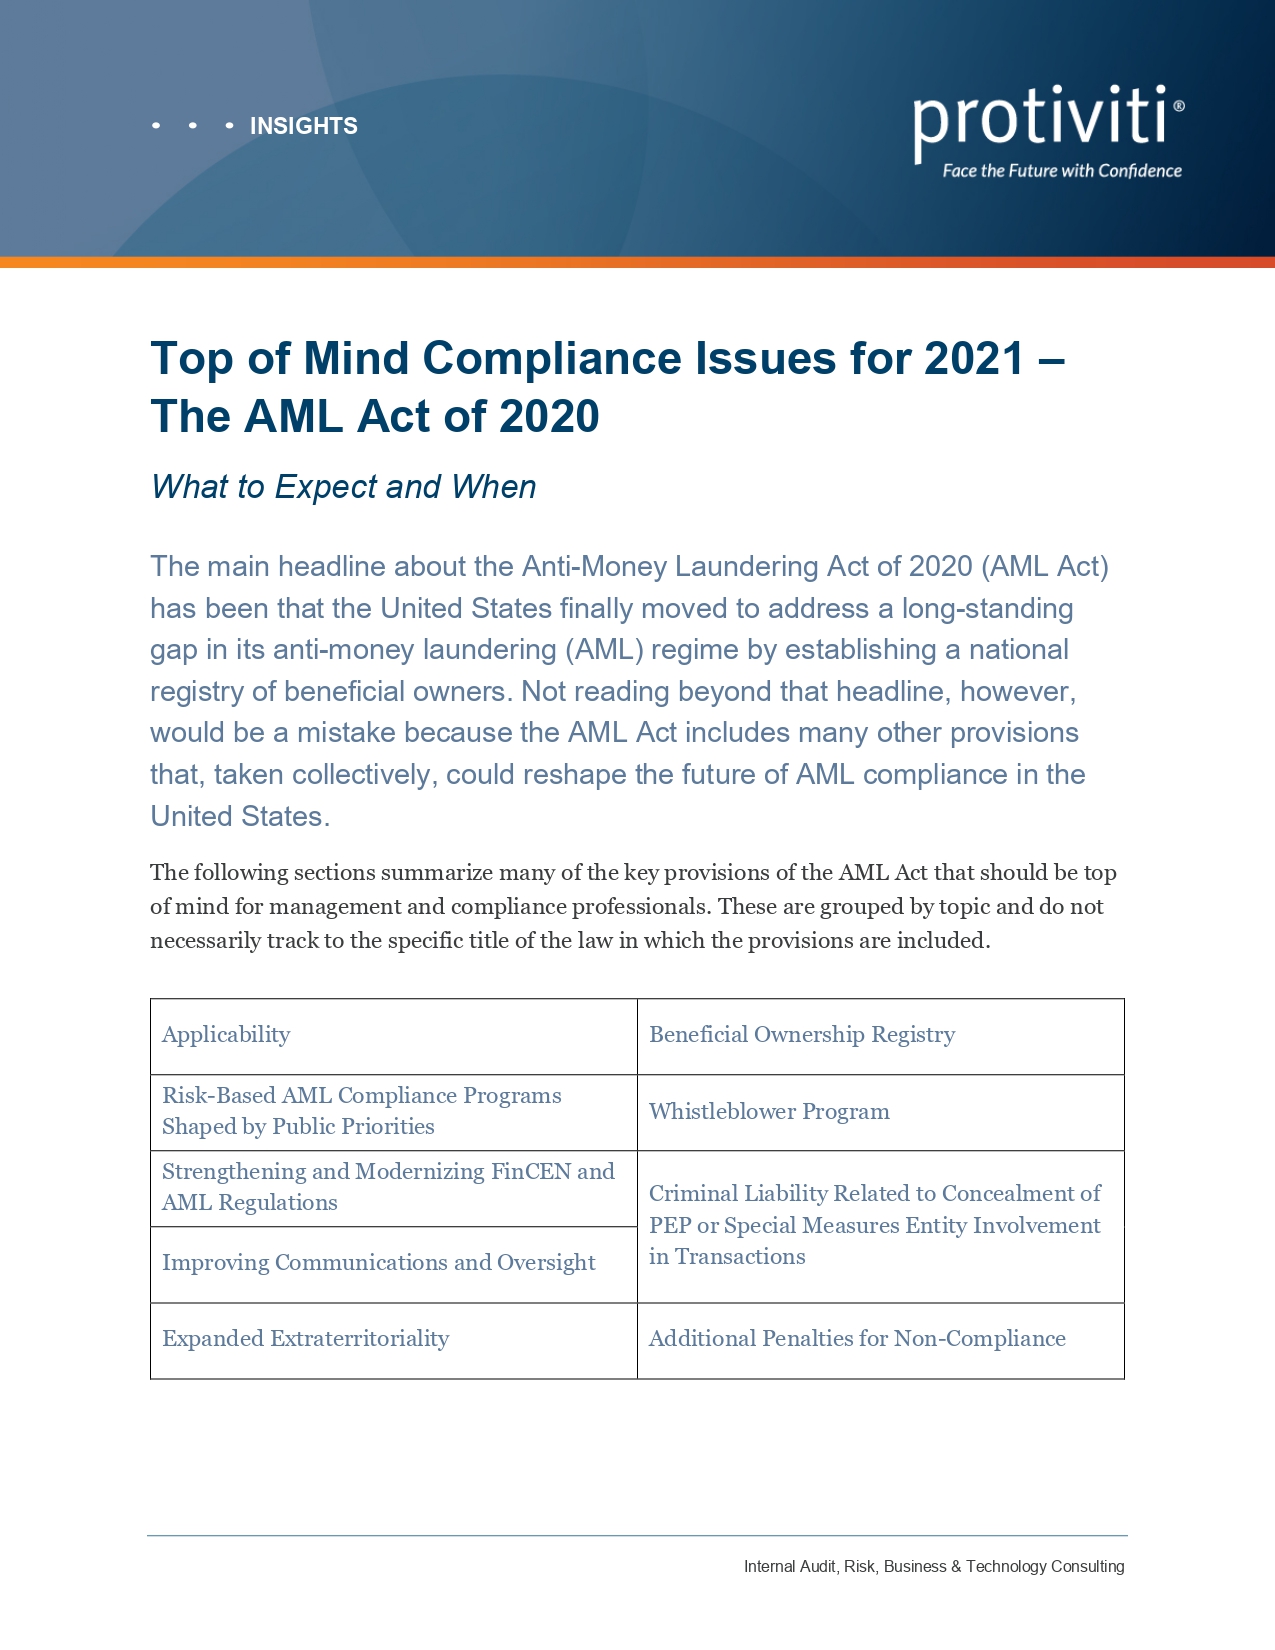 Top of Mind Compliance Issues for 2021 – The AML Act of 2020